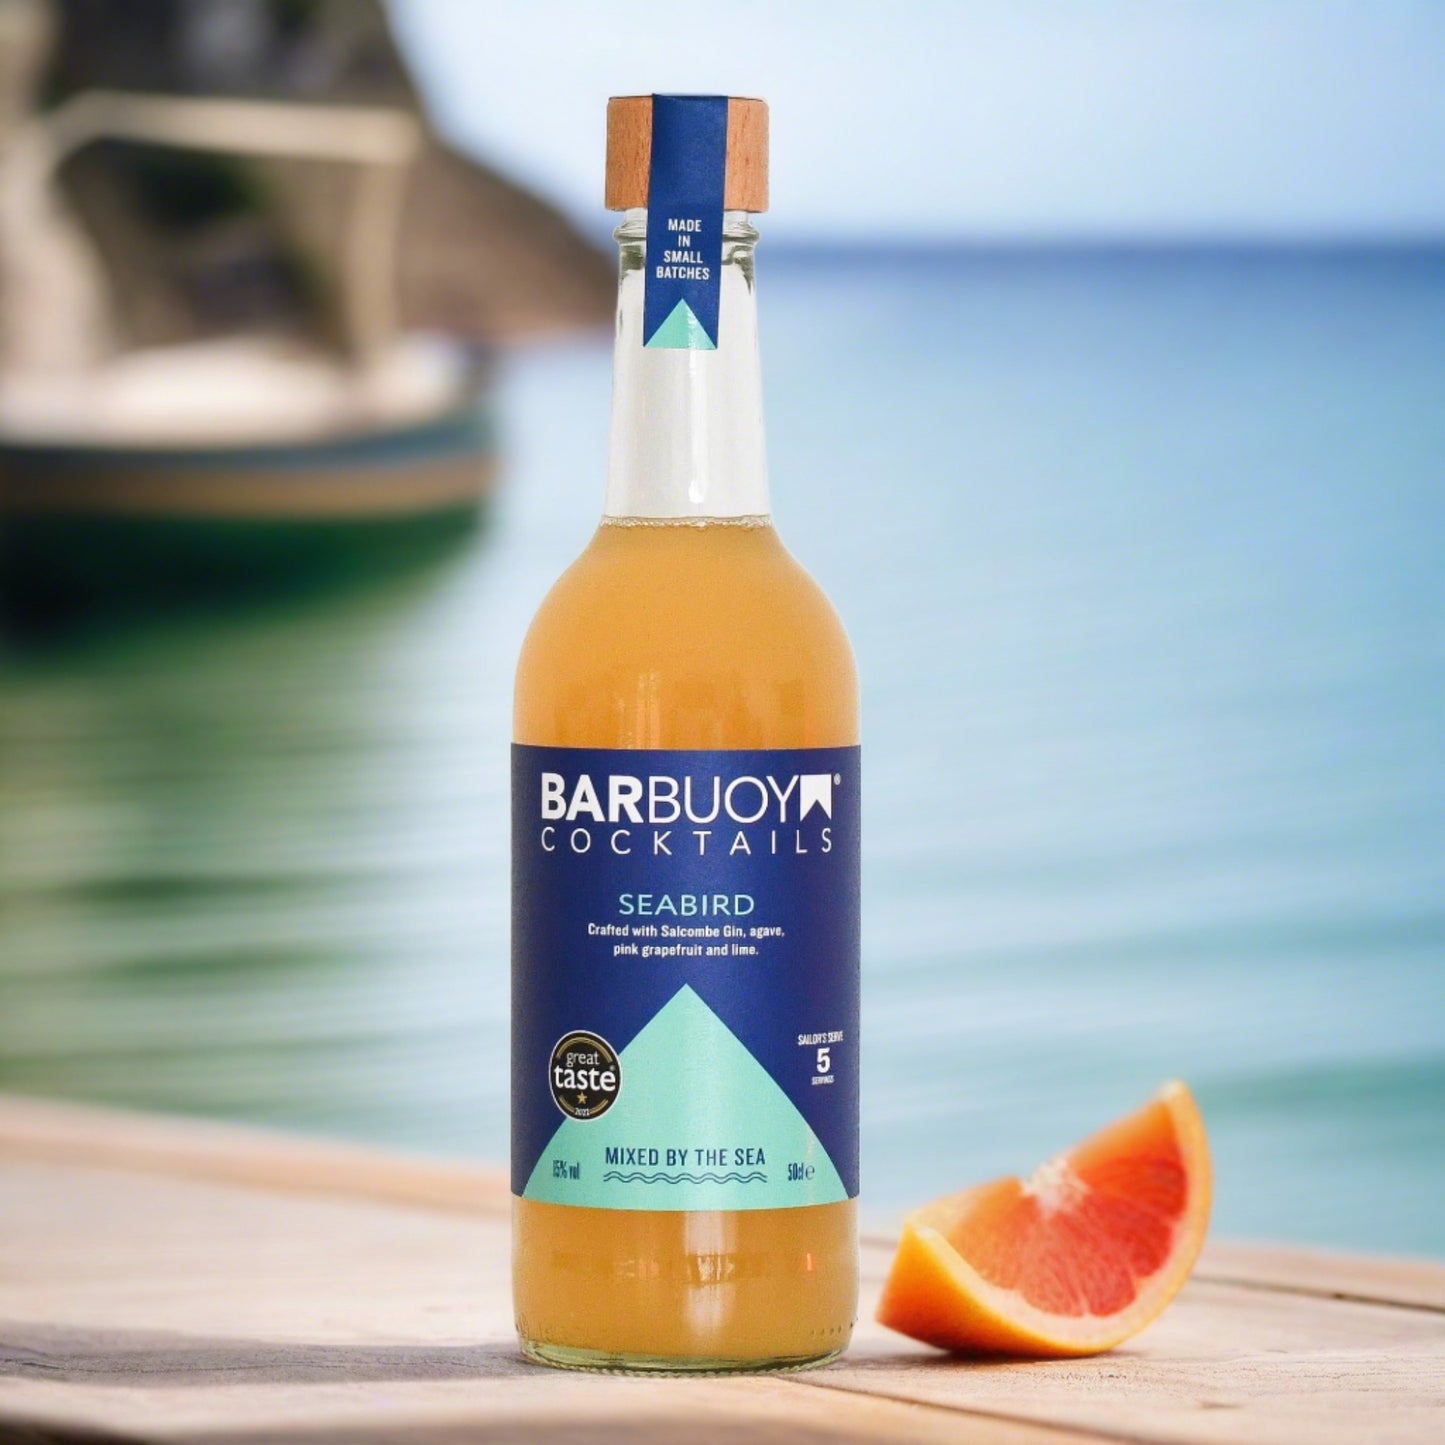 grapefruit gin ready made cocktail (seabird) by barbuoy cocktails 50cl bottle